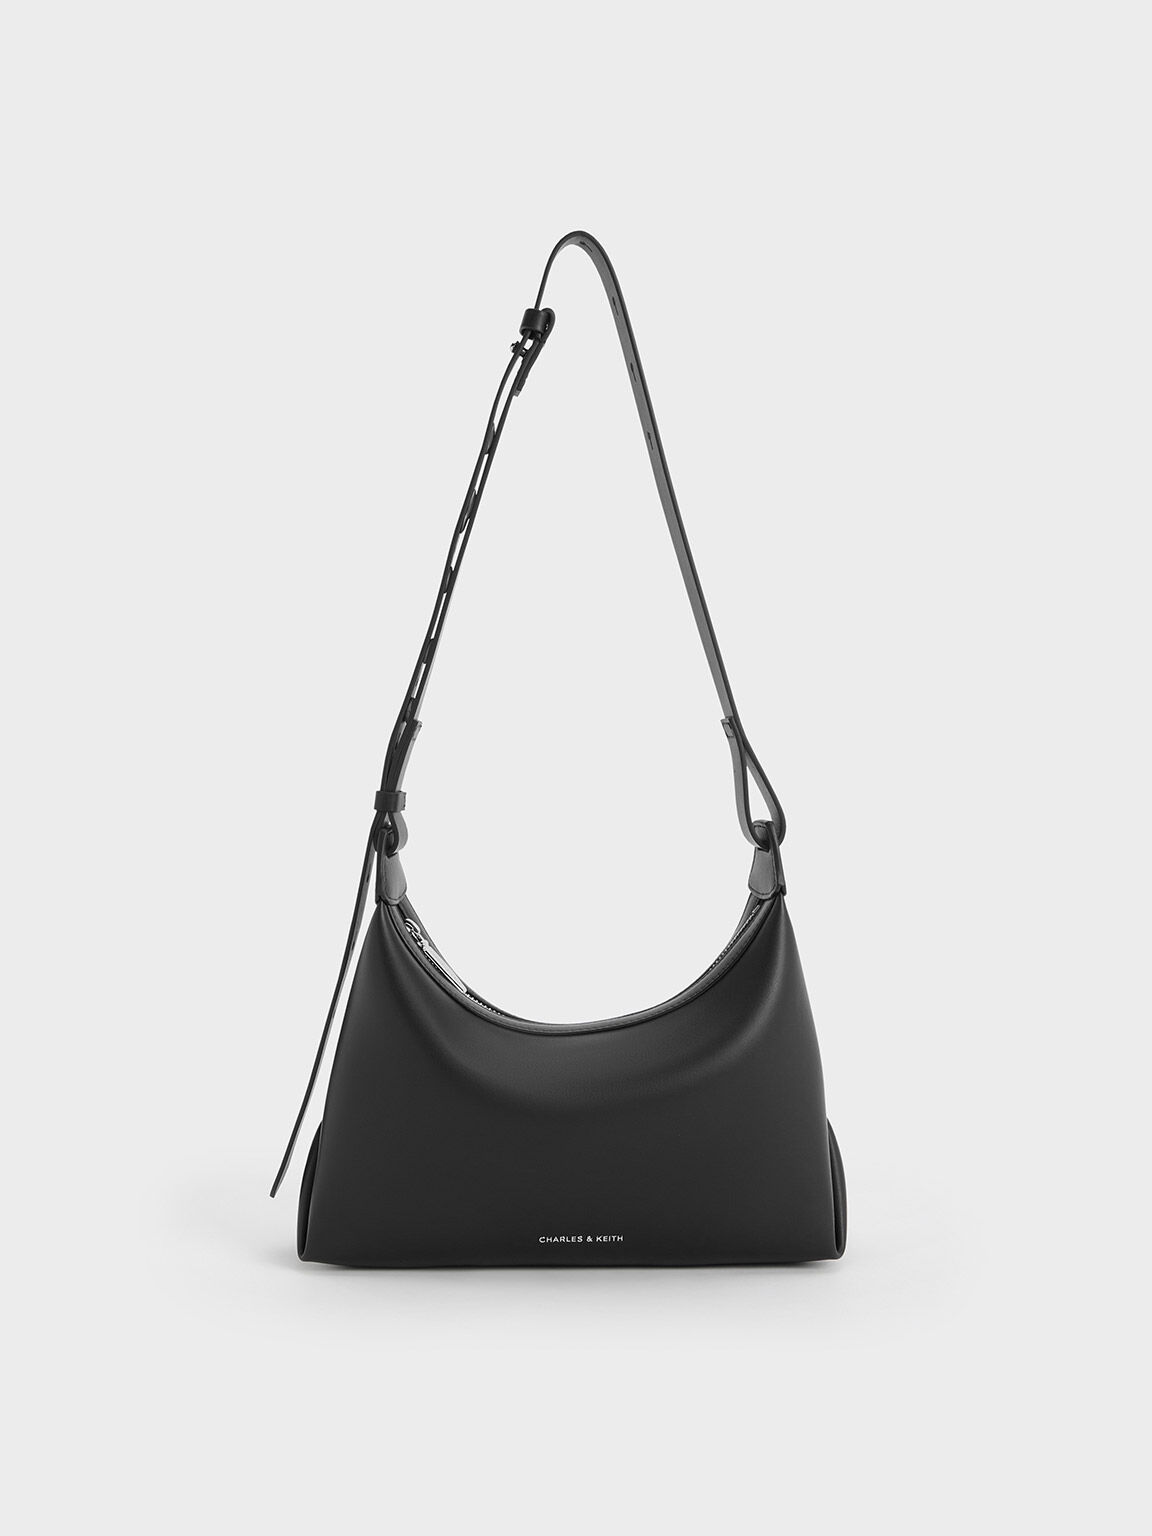 Women's Hobo Bags | Exclusive Styles | CHARLES & KEITH US